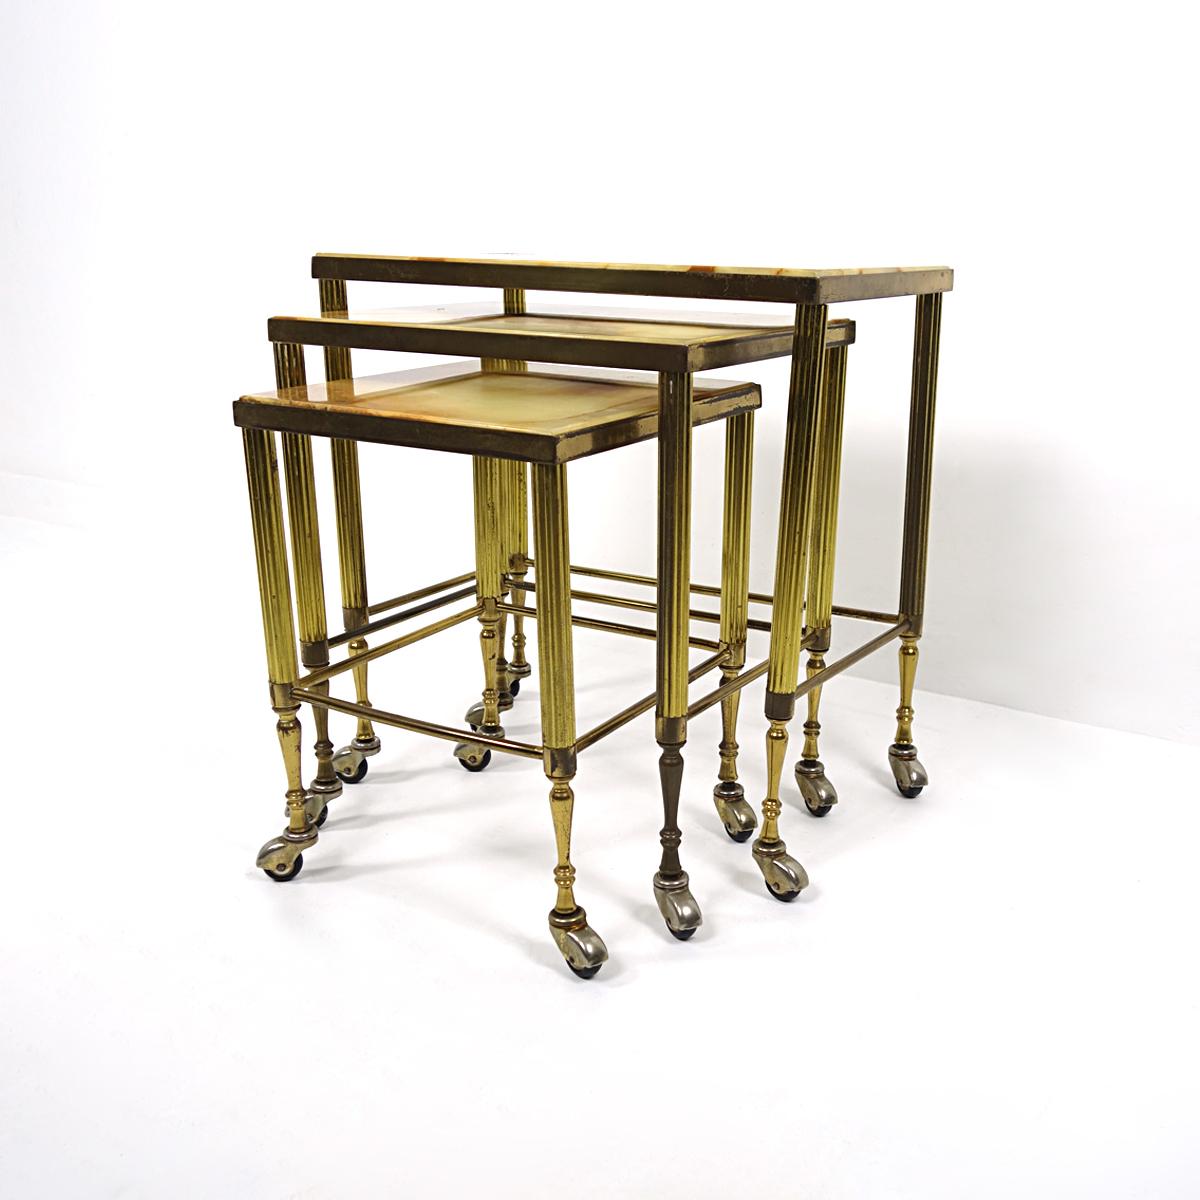 The design of this set of 3 Hollywood Regency nesting tables was clearly inspired by the iconic furniture the famous Paris based company Maison Jansen made. Their weight, looks and smoothly running wheels make the tables exude lots of grandeur. The